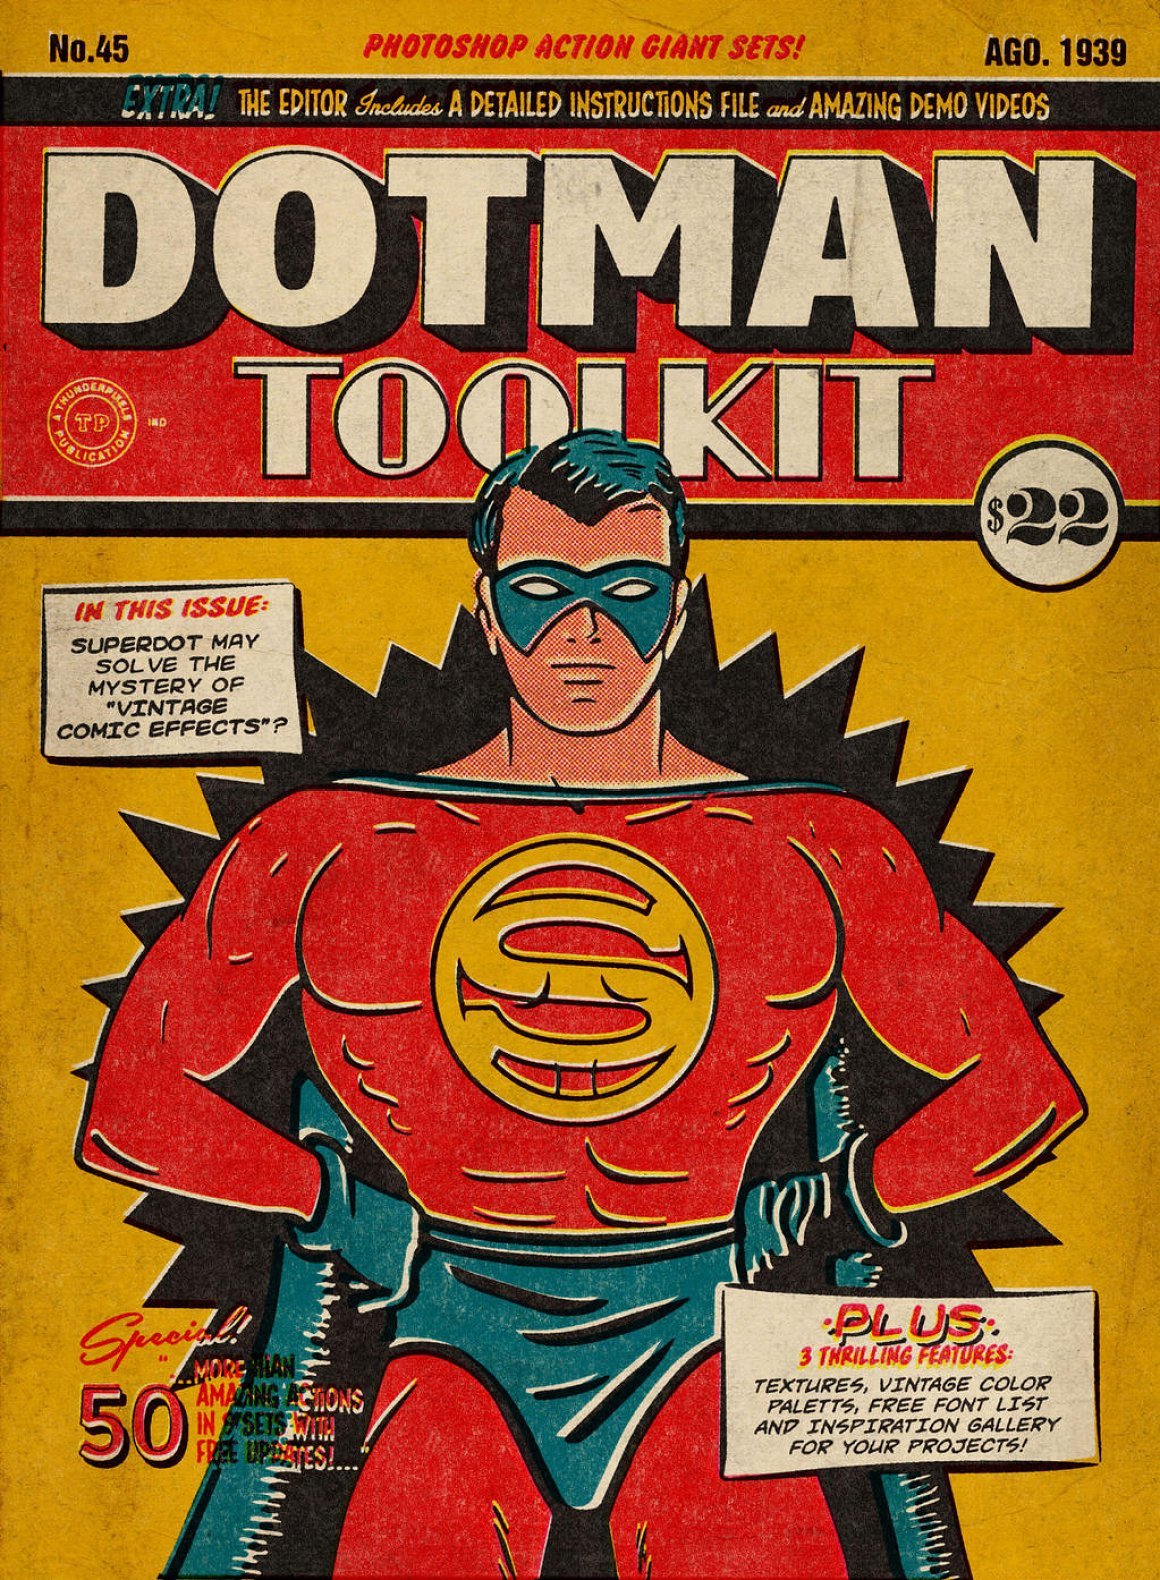 dotman toolkit professional vintage comic effects by thunderpixels dag8e9i fullview